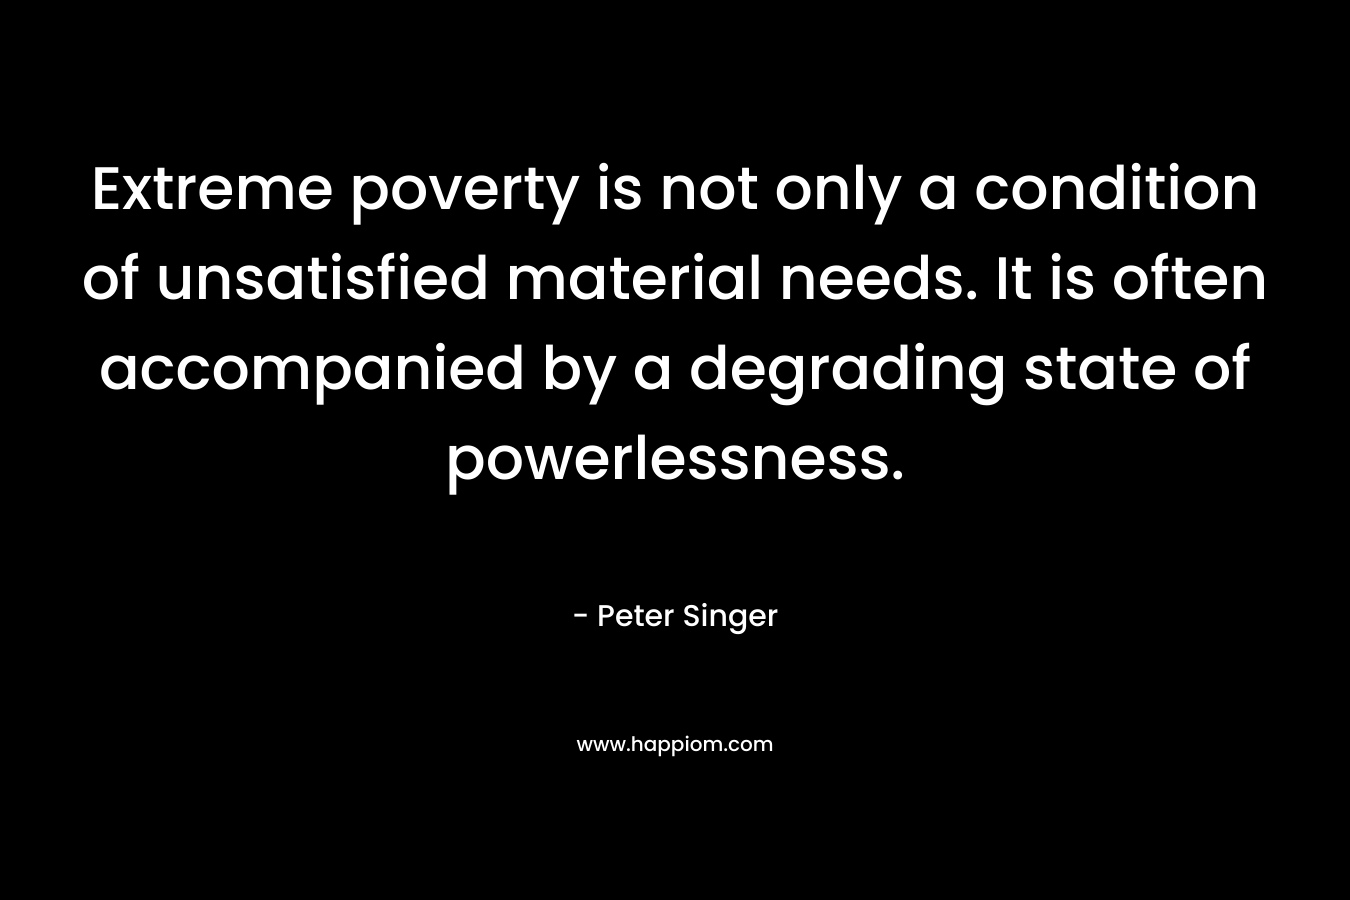 Extreme poverty is not only a condition of unsatisfied material needs. It is often accompanied by a degrading state of powerlessness. 